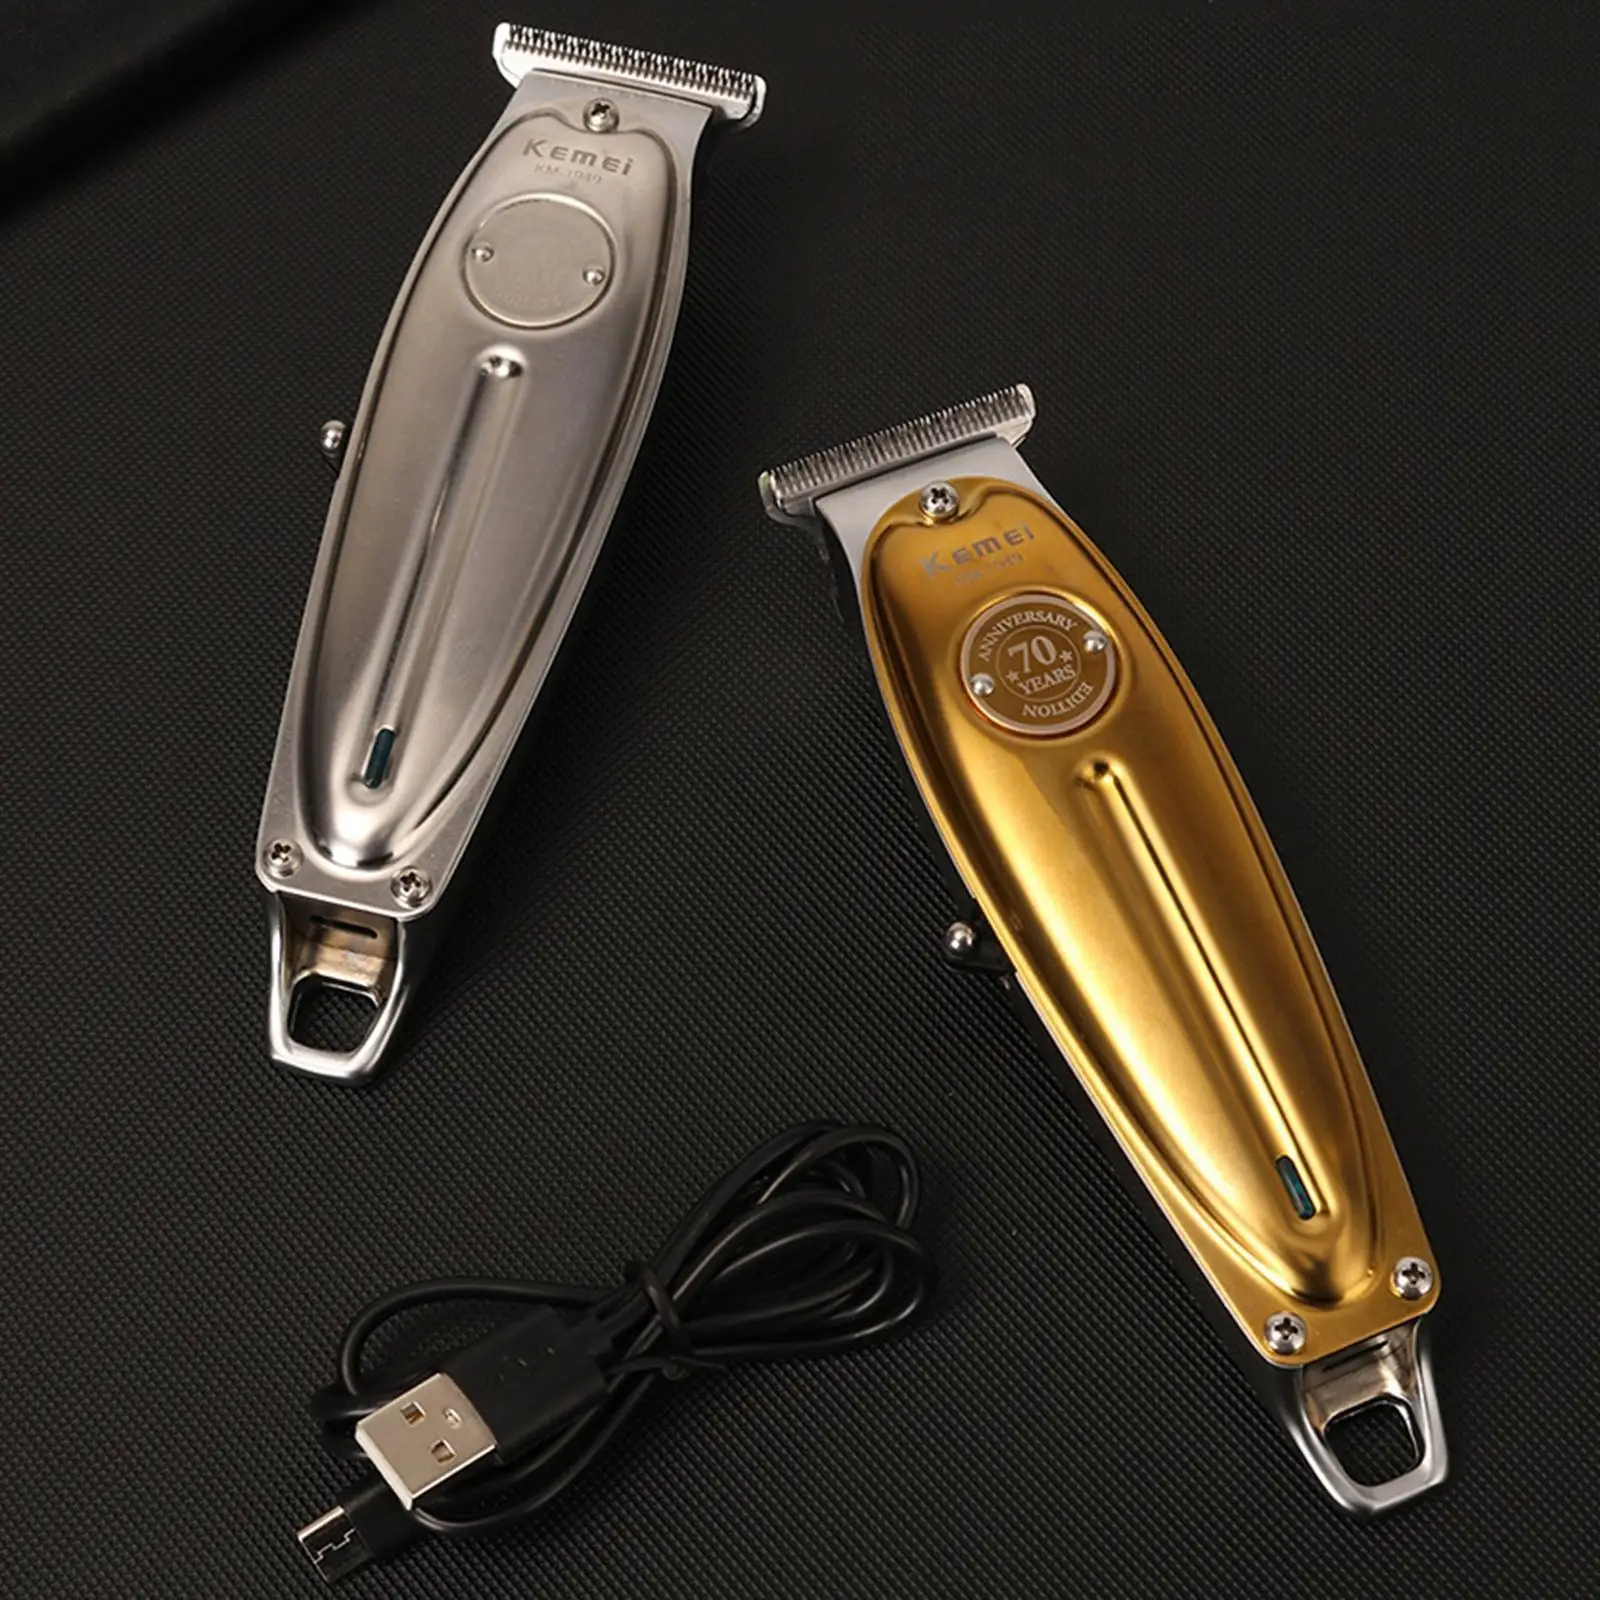 All Metal Electric USB Boys Men`s Hair Clippers Kit Trimmer with Guide Combs